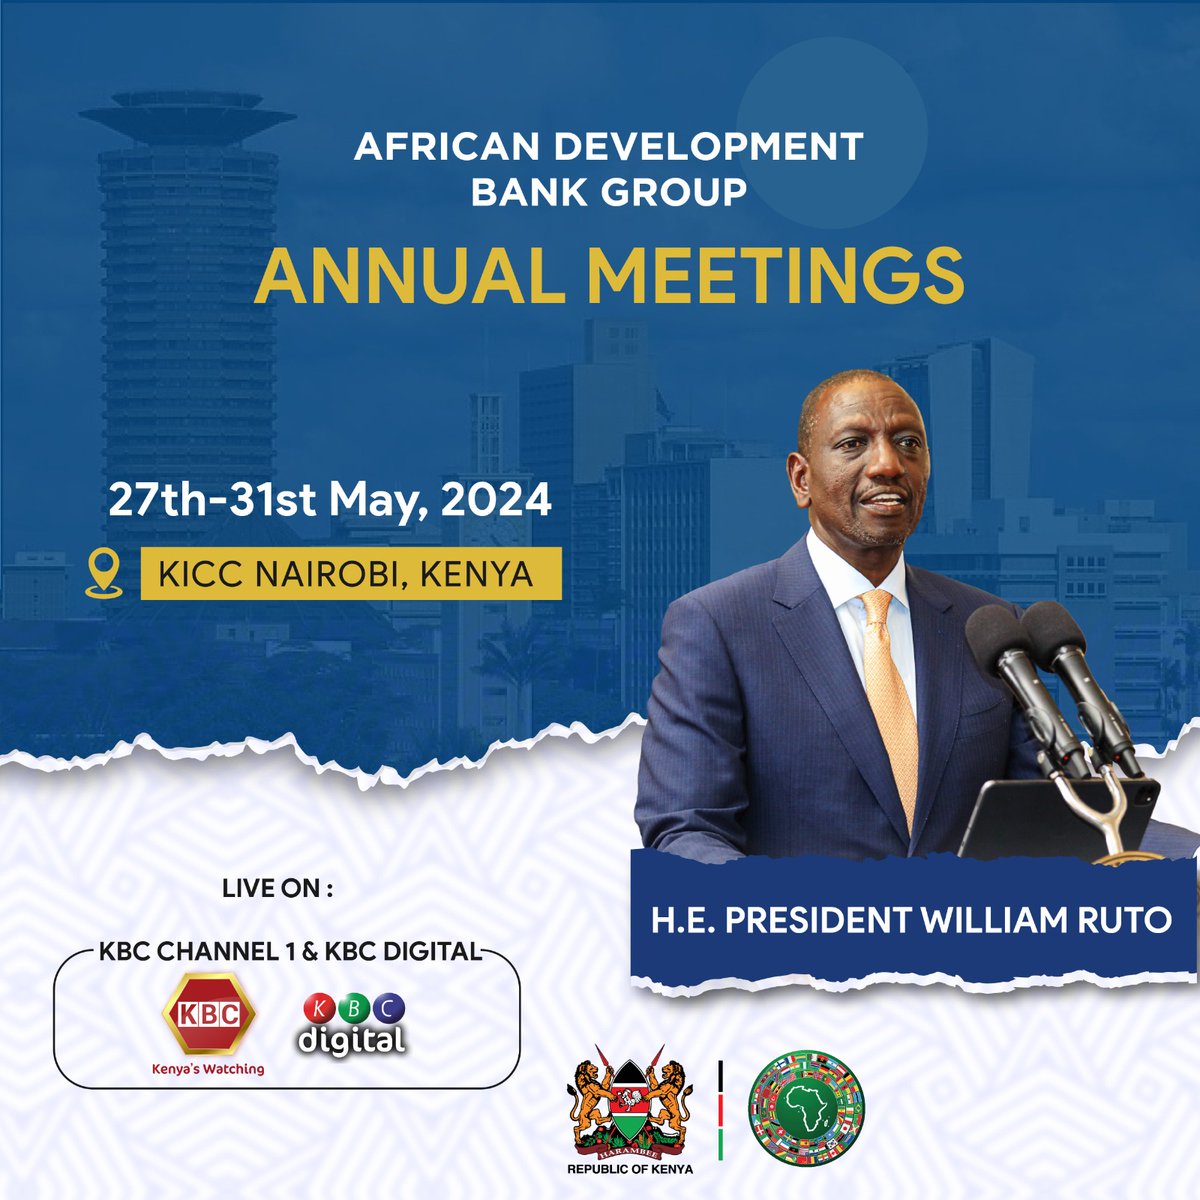 Join us for the African Development Bank Group Annual Meetings from May 27th to 31st, 2024, at KICC Nairobi, Kenya. H.E. President William Ruto will be a key speaker. Watch the event live on @KBCChannel1 and KBC Digital #KBCniYetu. #AfDBAM2024